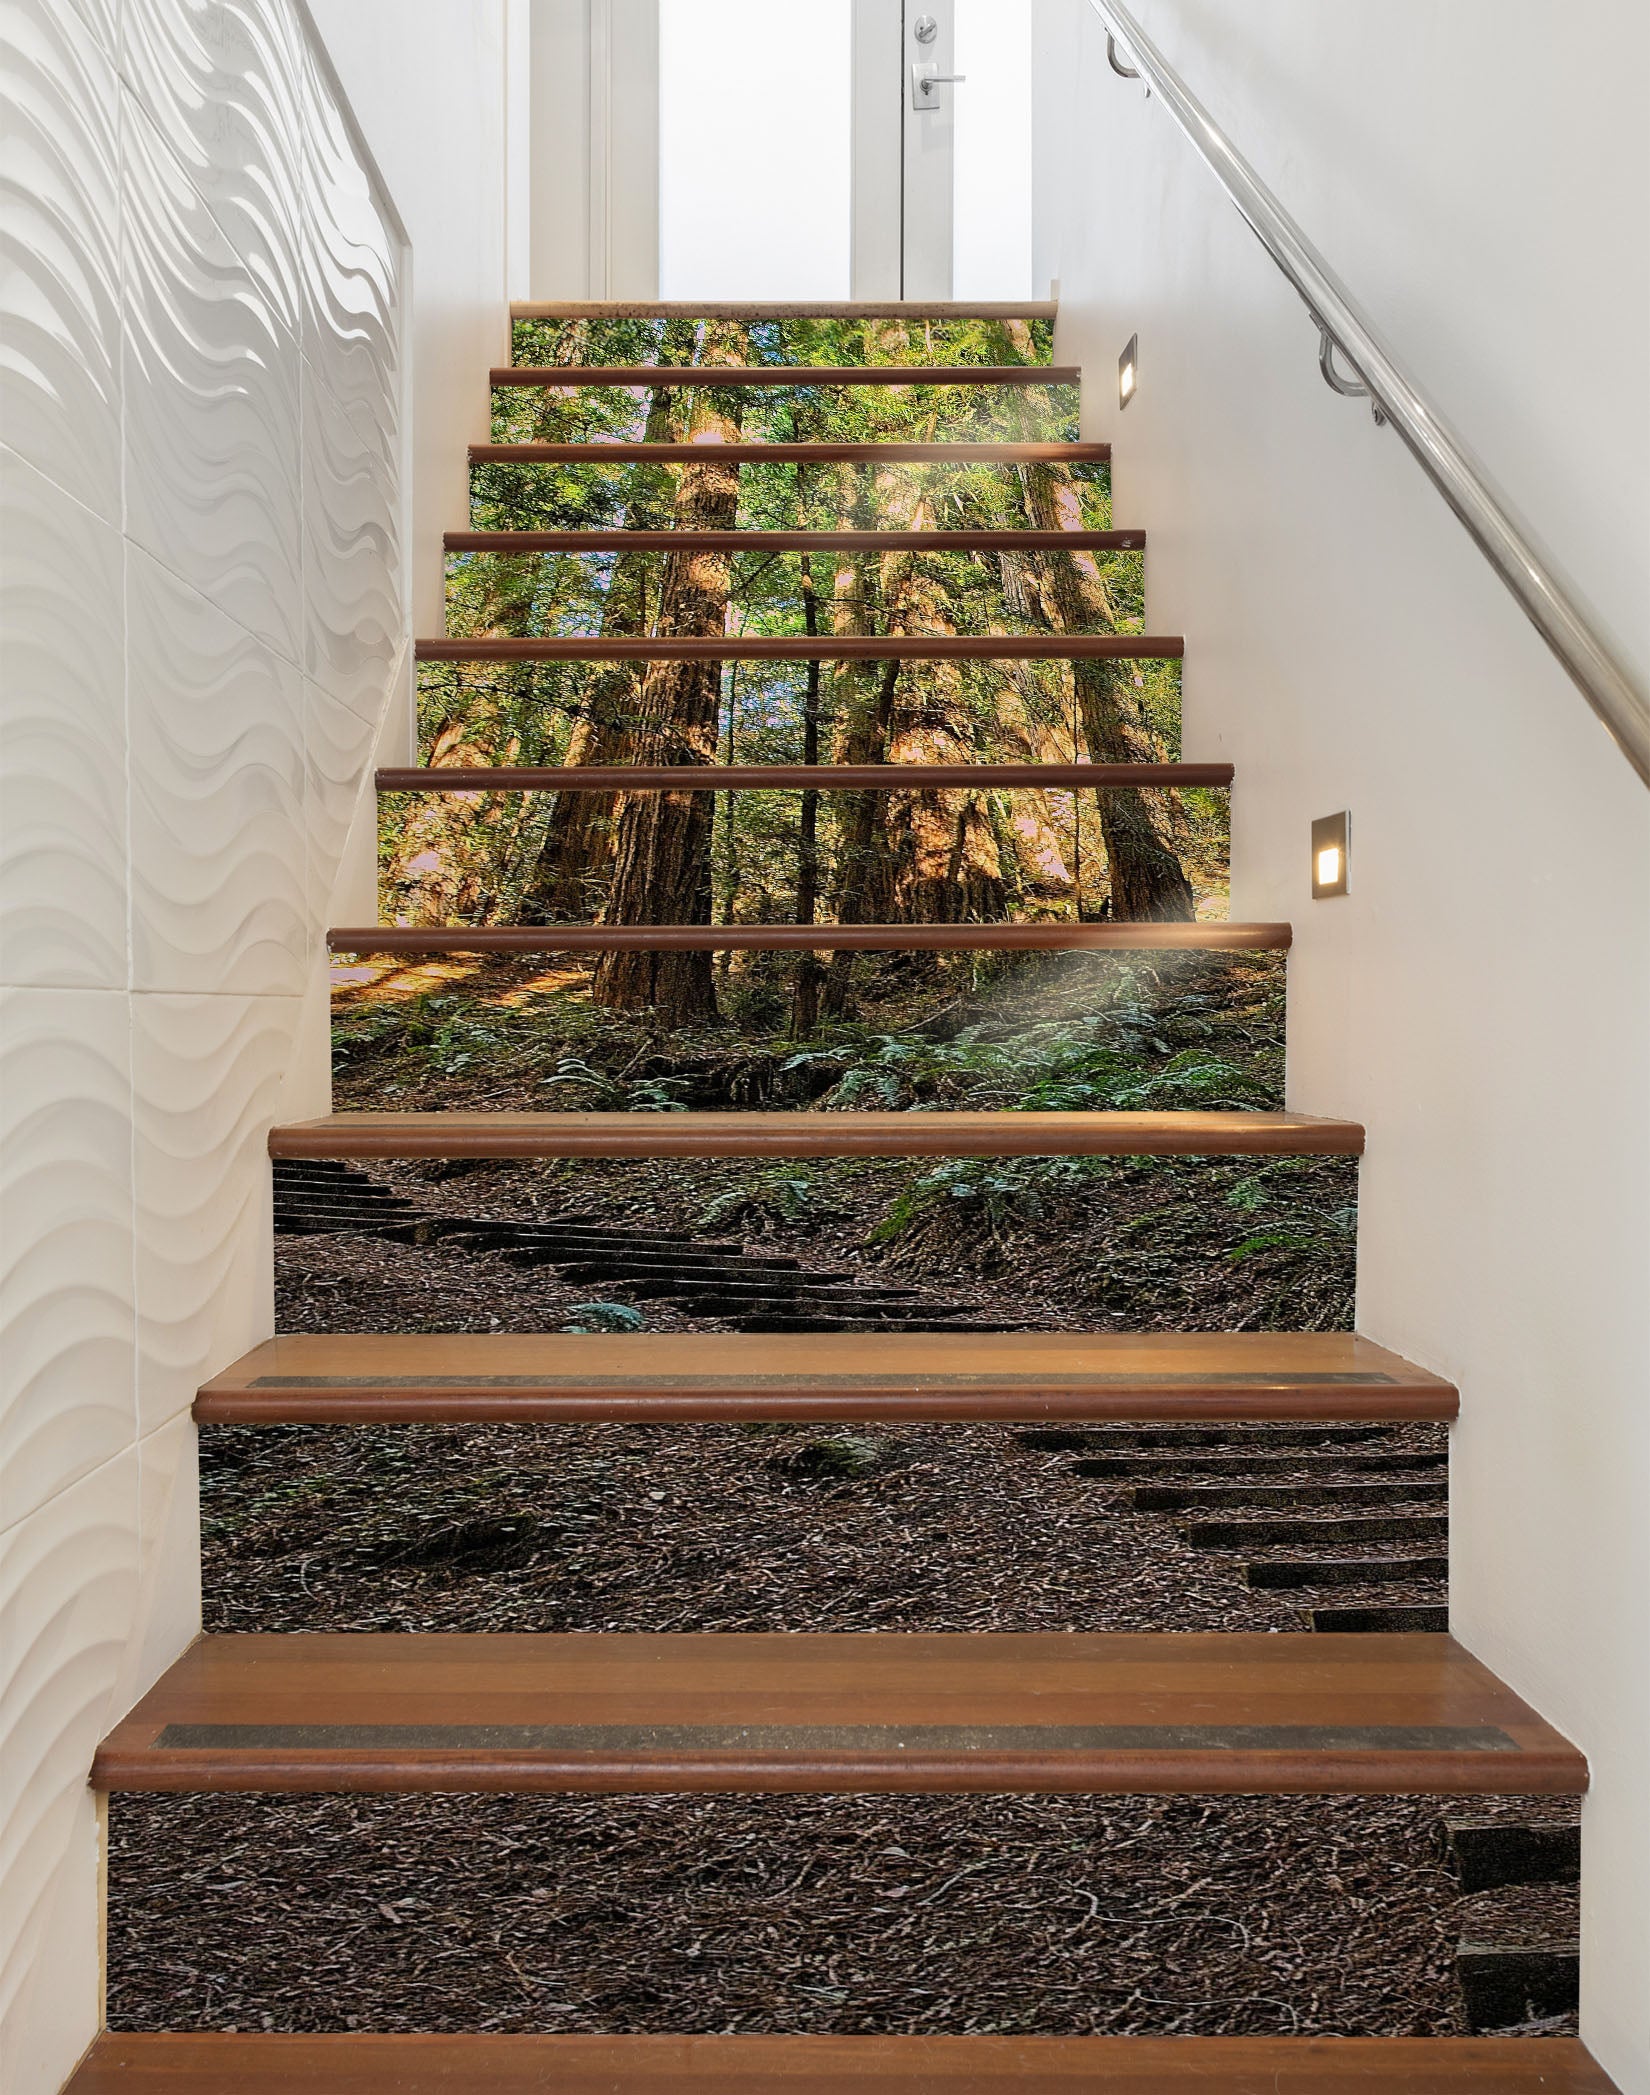 3D Forest Walkway 9496 Kathy Barefield Stair Risers